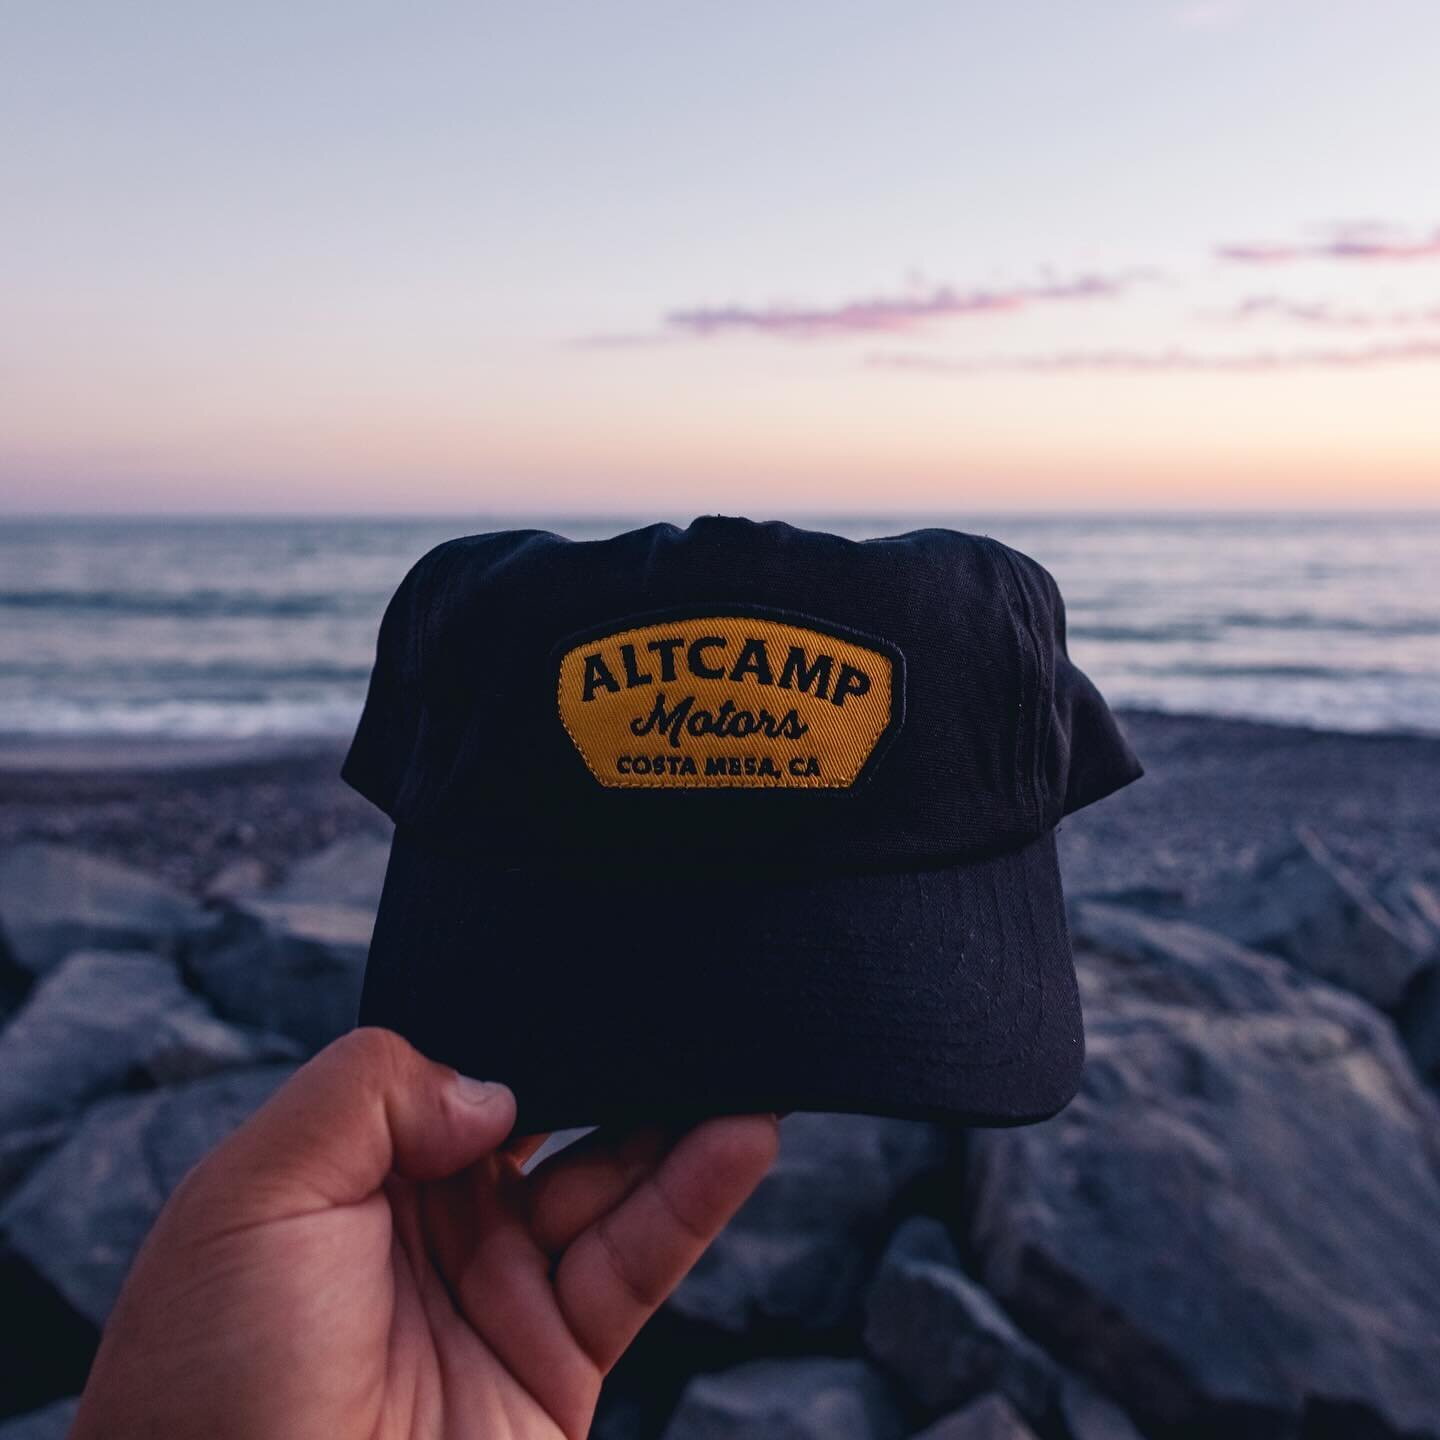 Keen for a new lid❓DM us your name, email, and shipping address and we&rsquo;ll get this limited-edition patch hat in the mail to you stat! $30 while supplies last.

*Price includes shipping and taxes. US only. Payment instructions will be sent via D